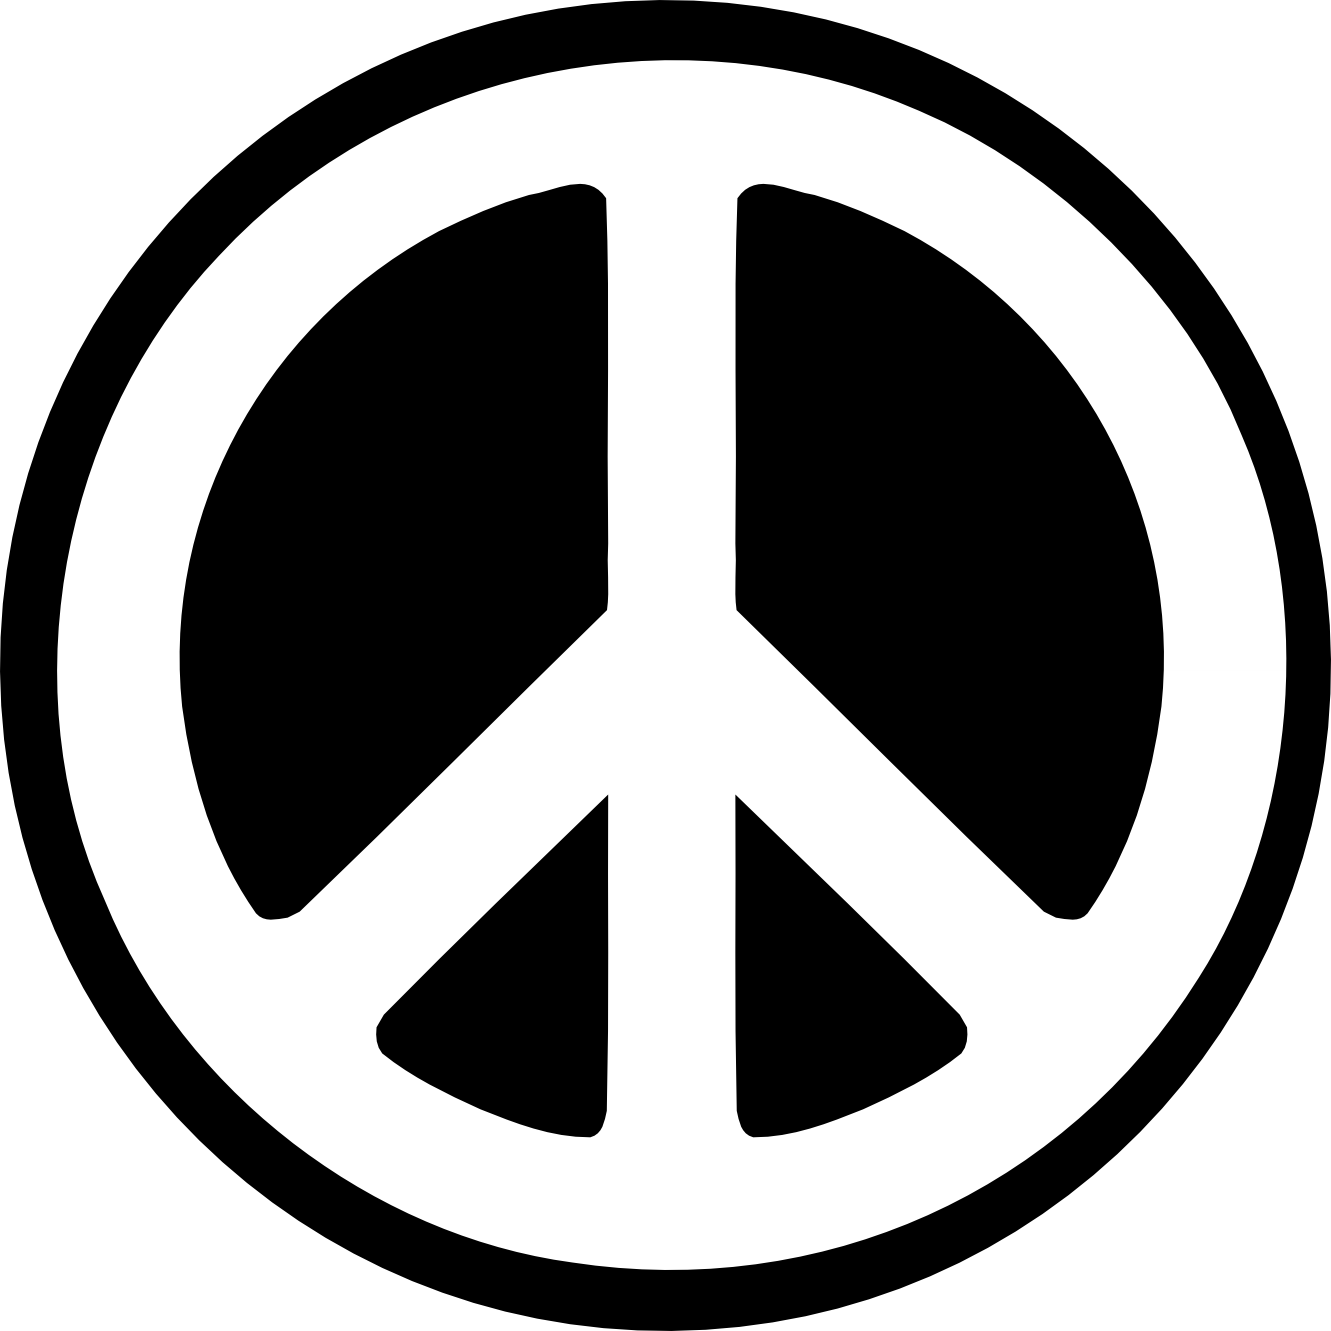 Peace sign images free clipart